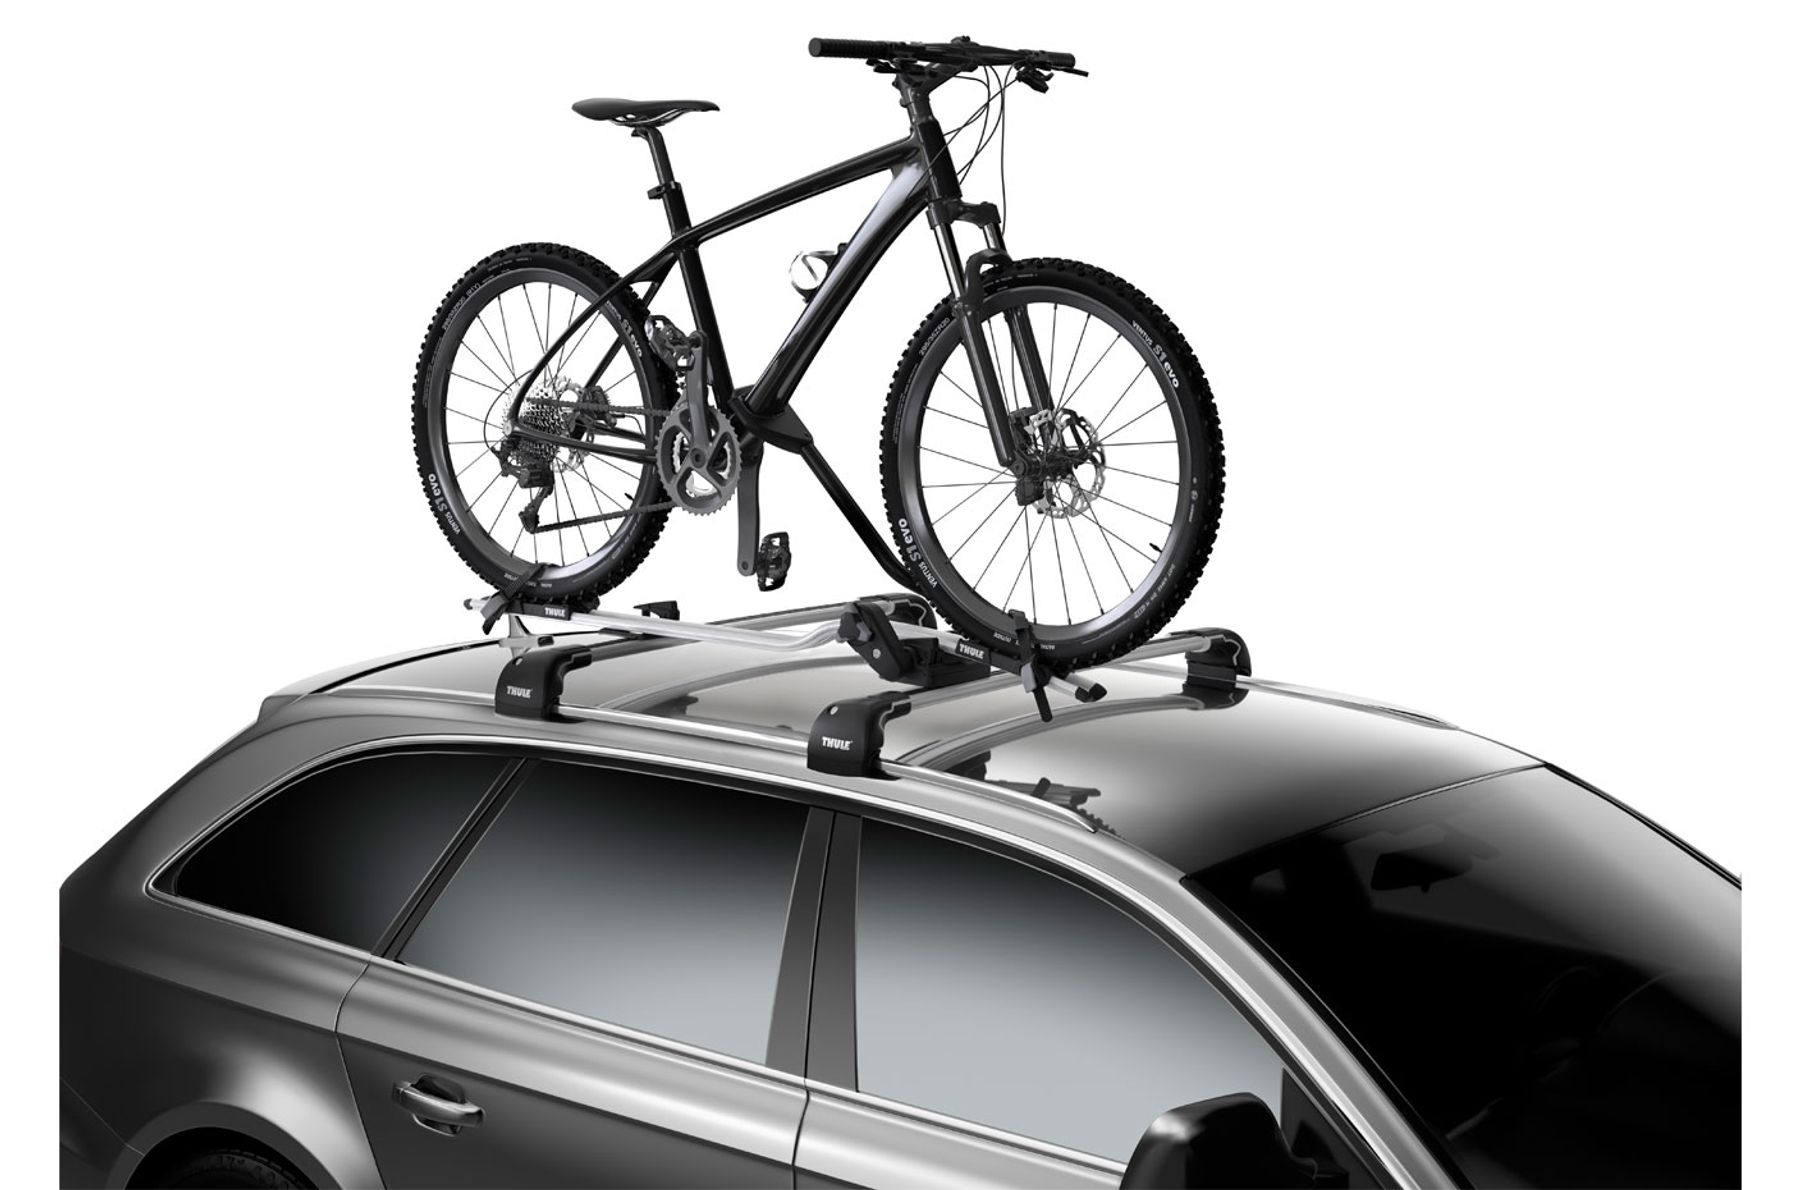 Car Roof Bike Rack Carry Holder Travel Carrying Wheel Block Accessories 